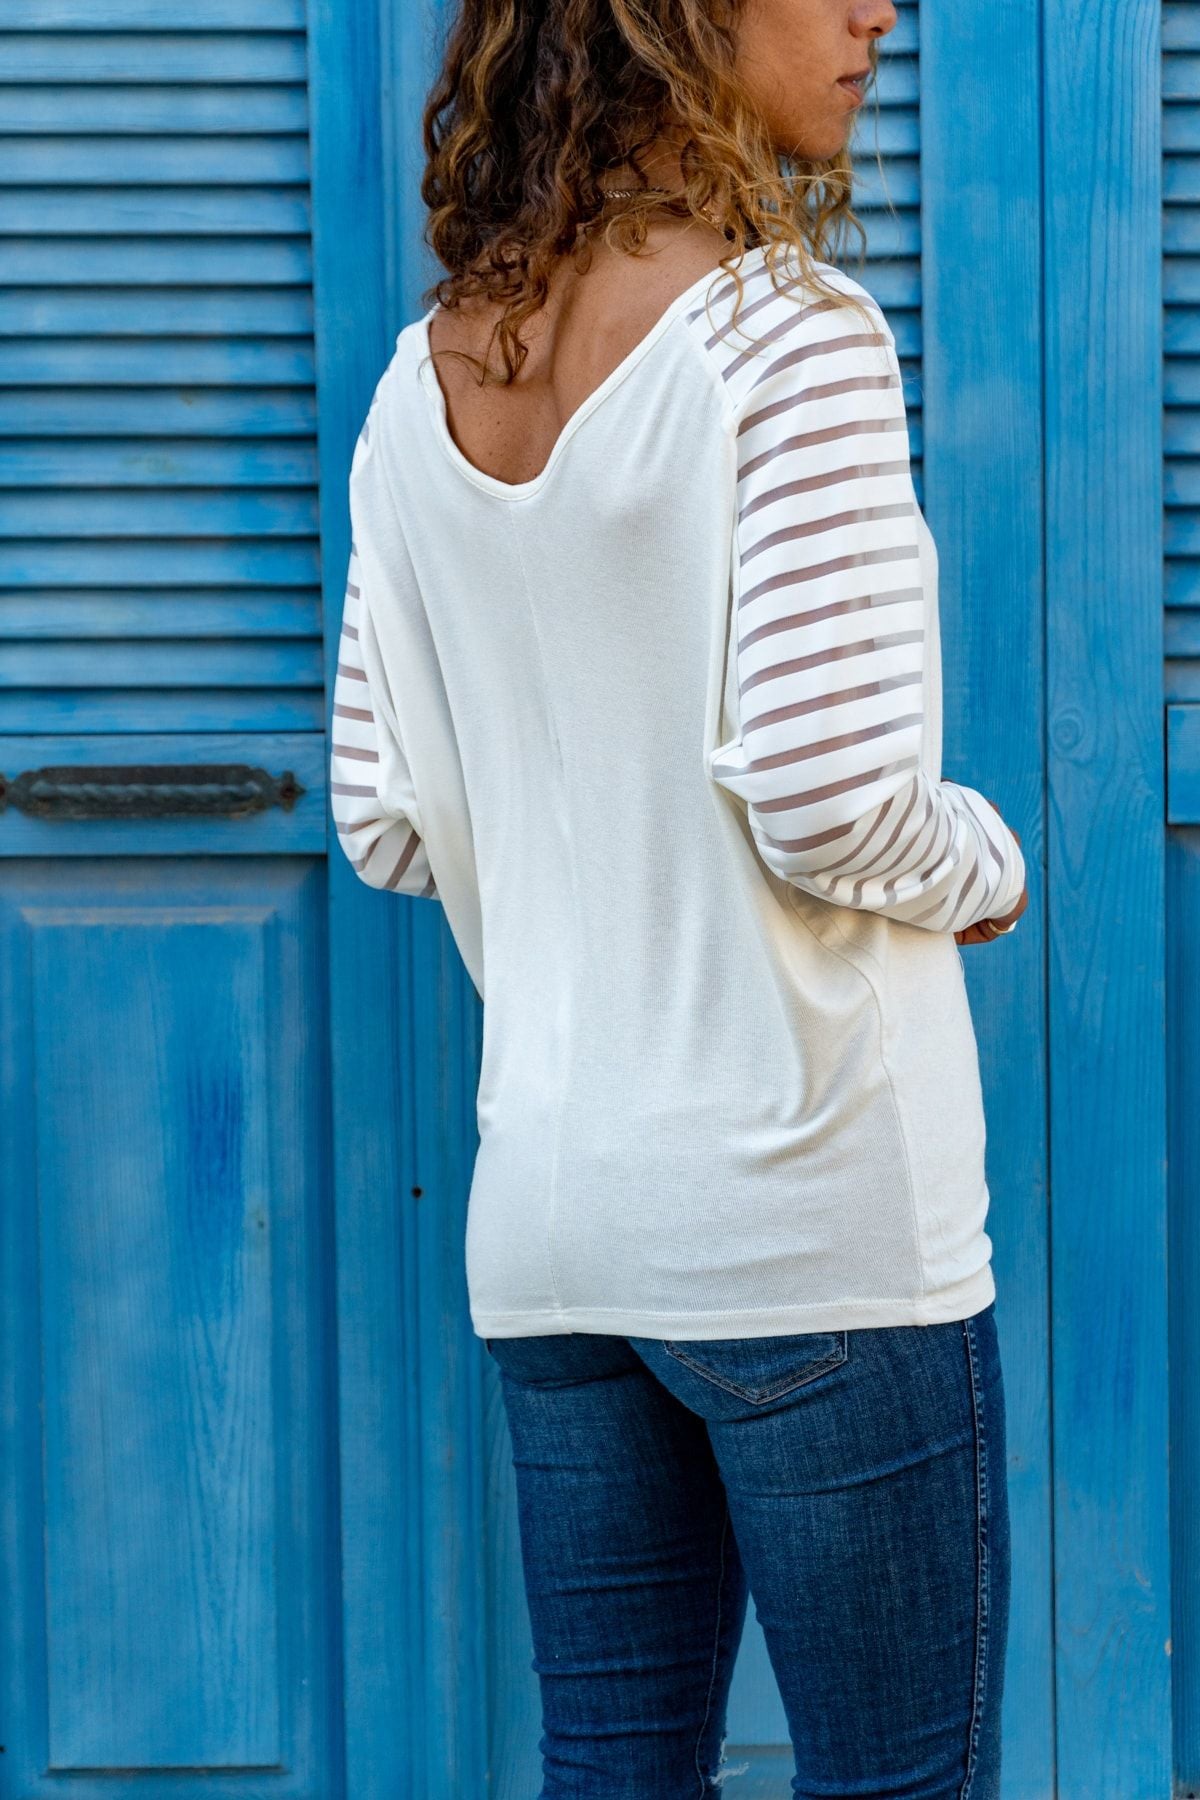 White Women's Blouse - Sexy V-Neck, Long Sleeves with Mesh and Ribbon Special Design Detail for Chic and Modern Look